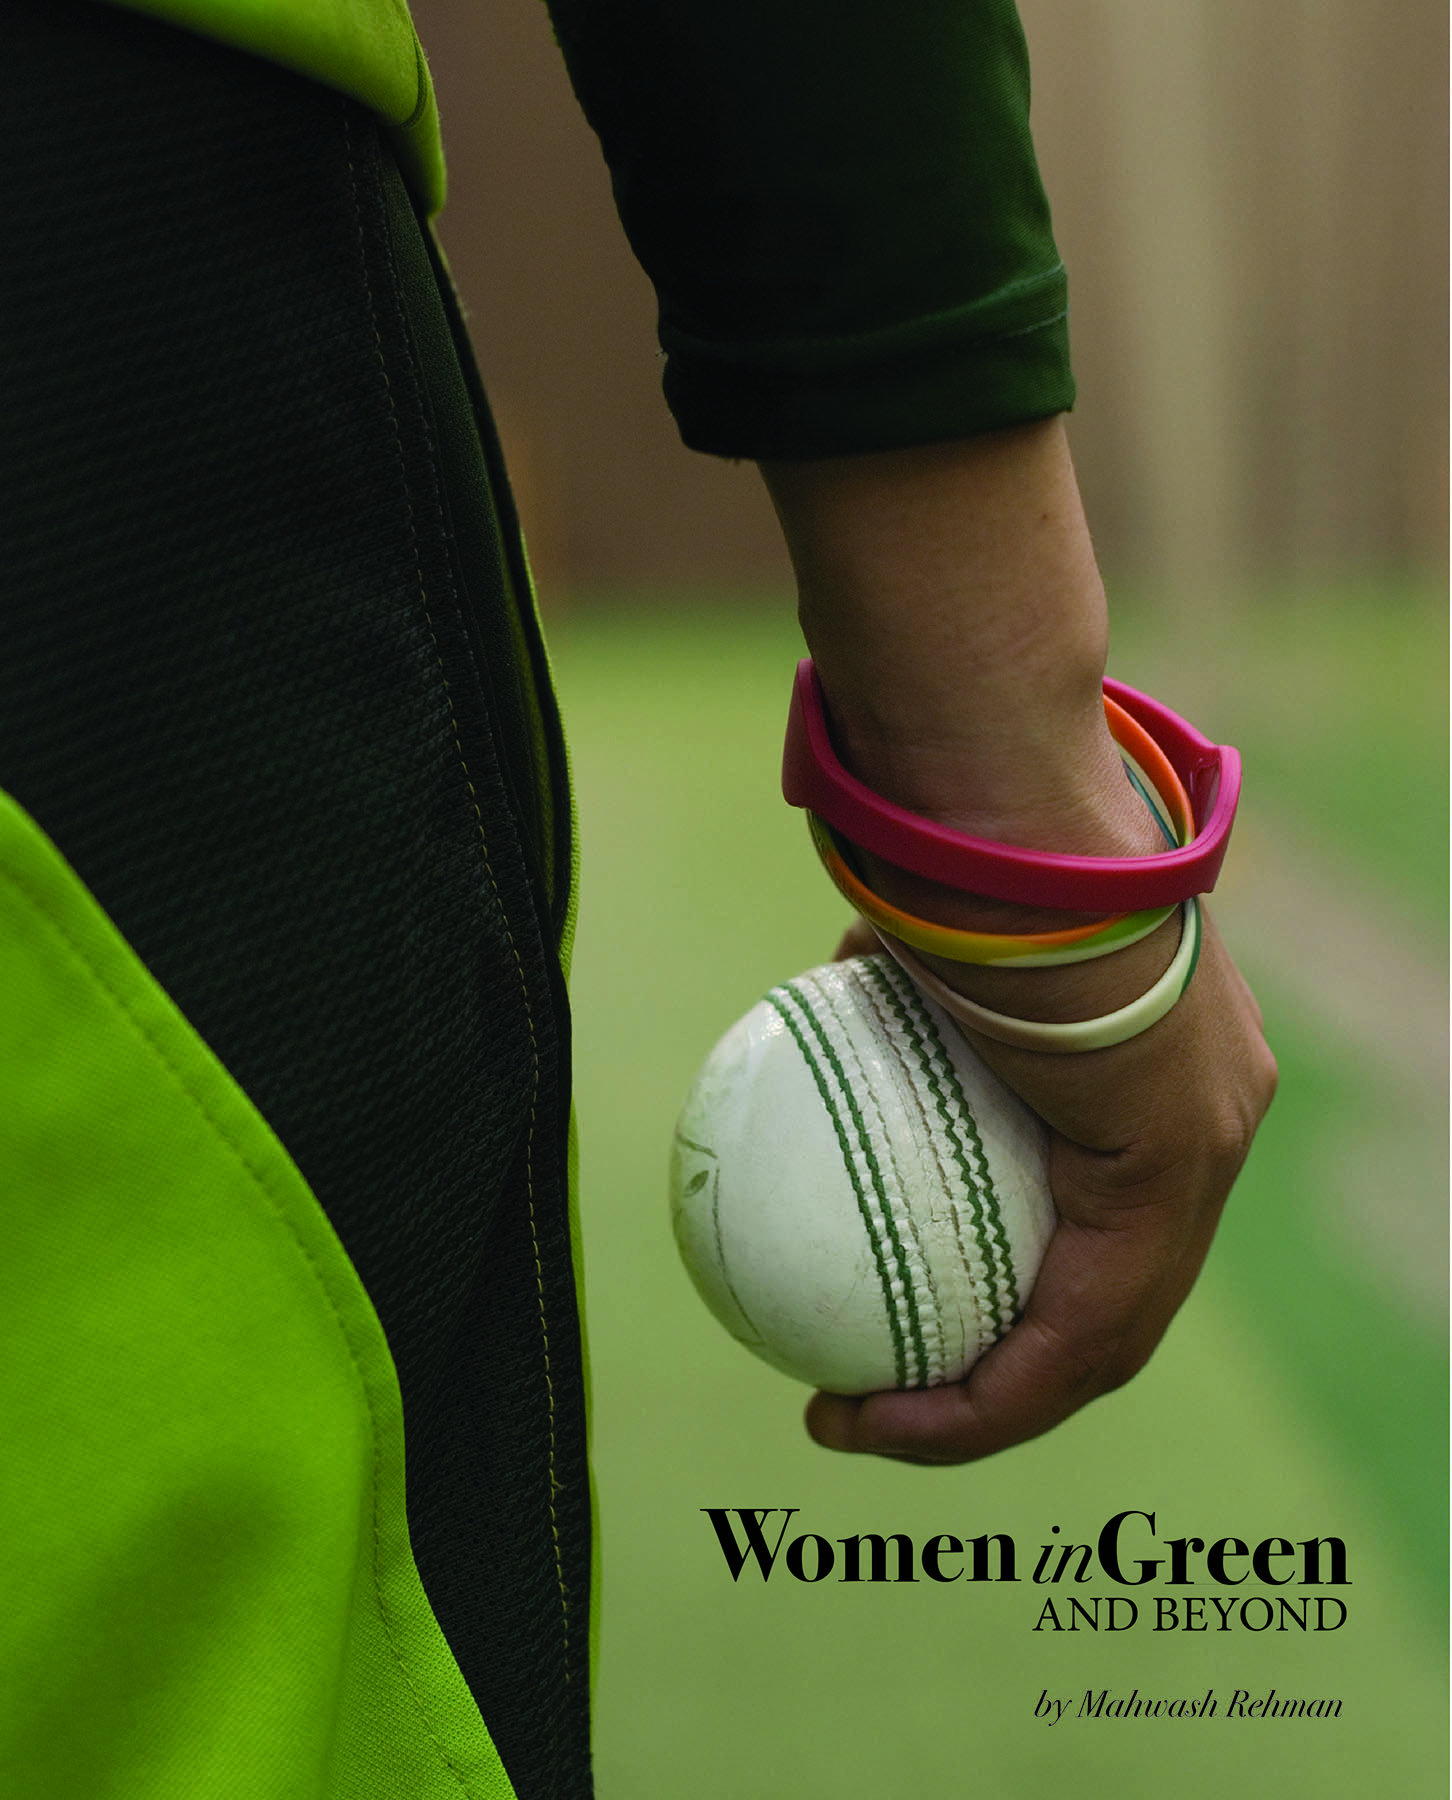 Women In Green And Beyond
